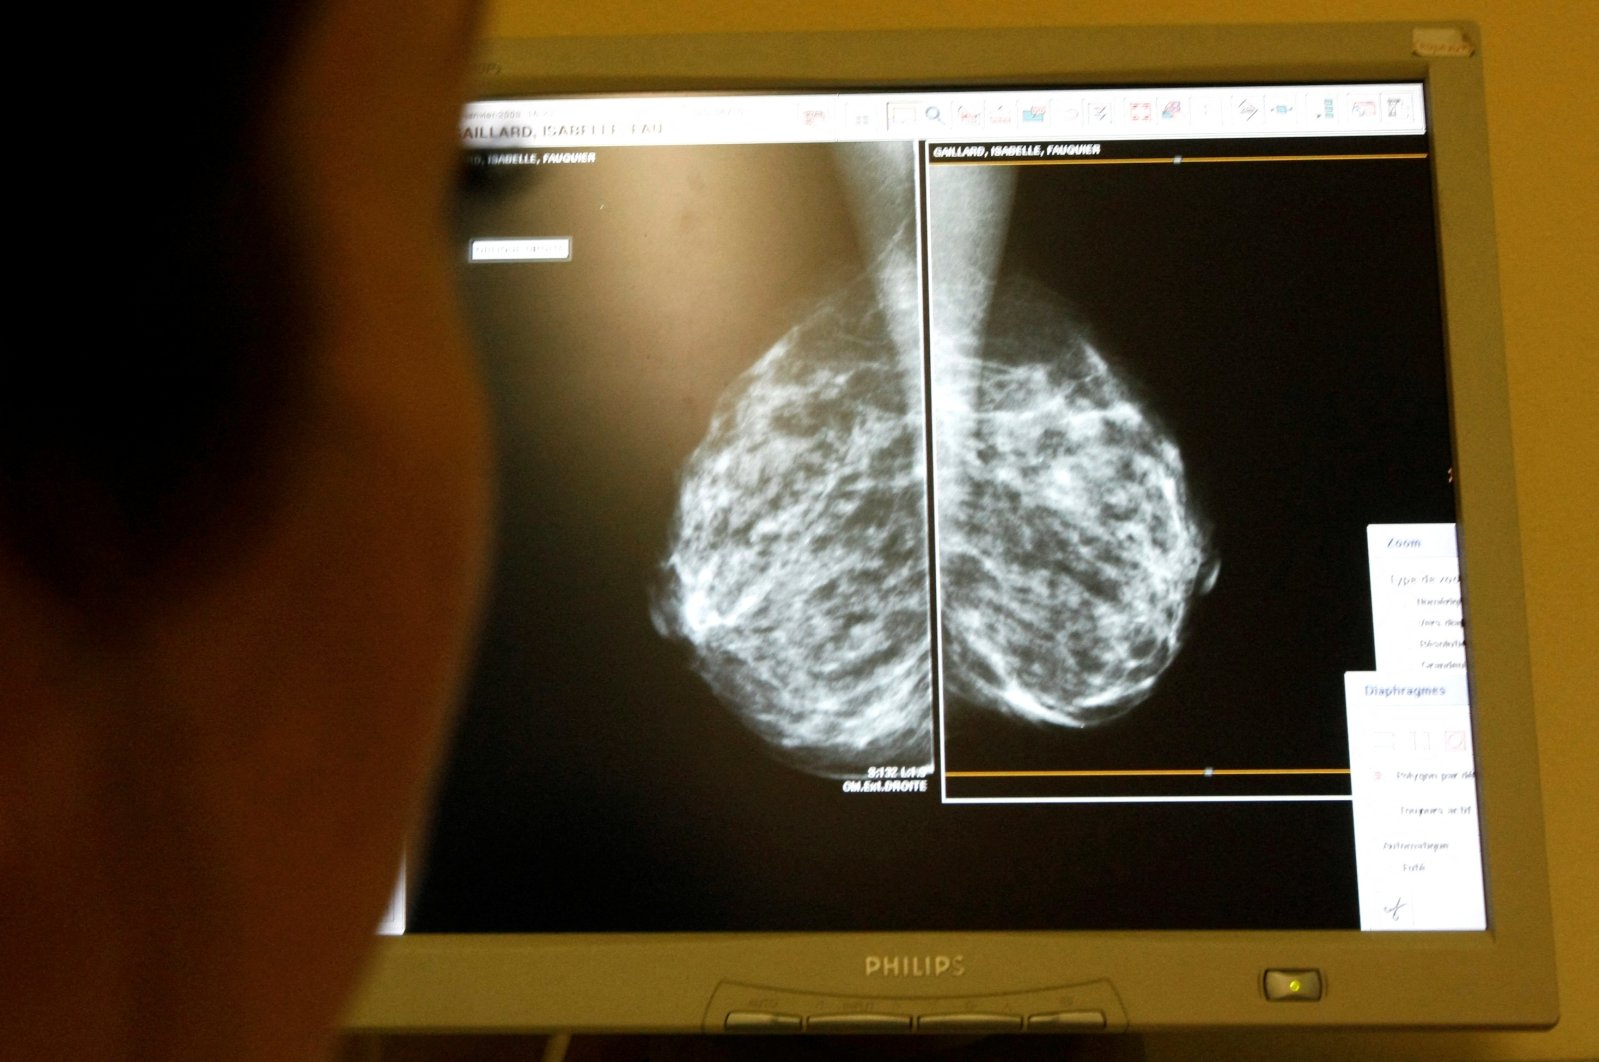 A doctor exams mammograms, a special type of X-ray of the breasts used to detect tumors, at a clinic in Nice, France, Jan. 4, 2008. (Reuters Photo)